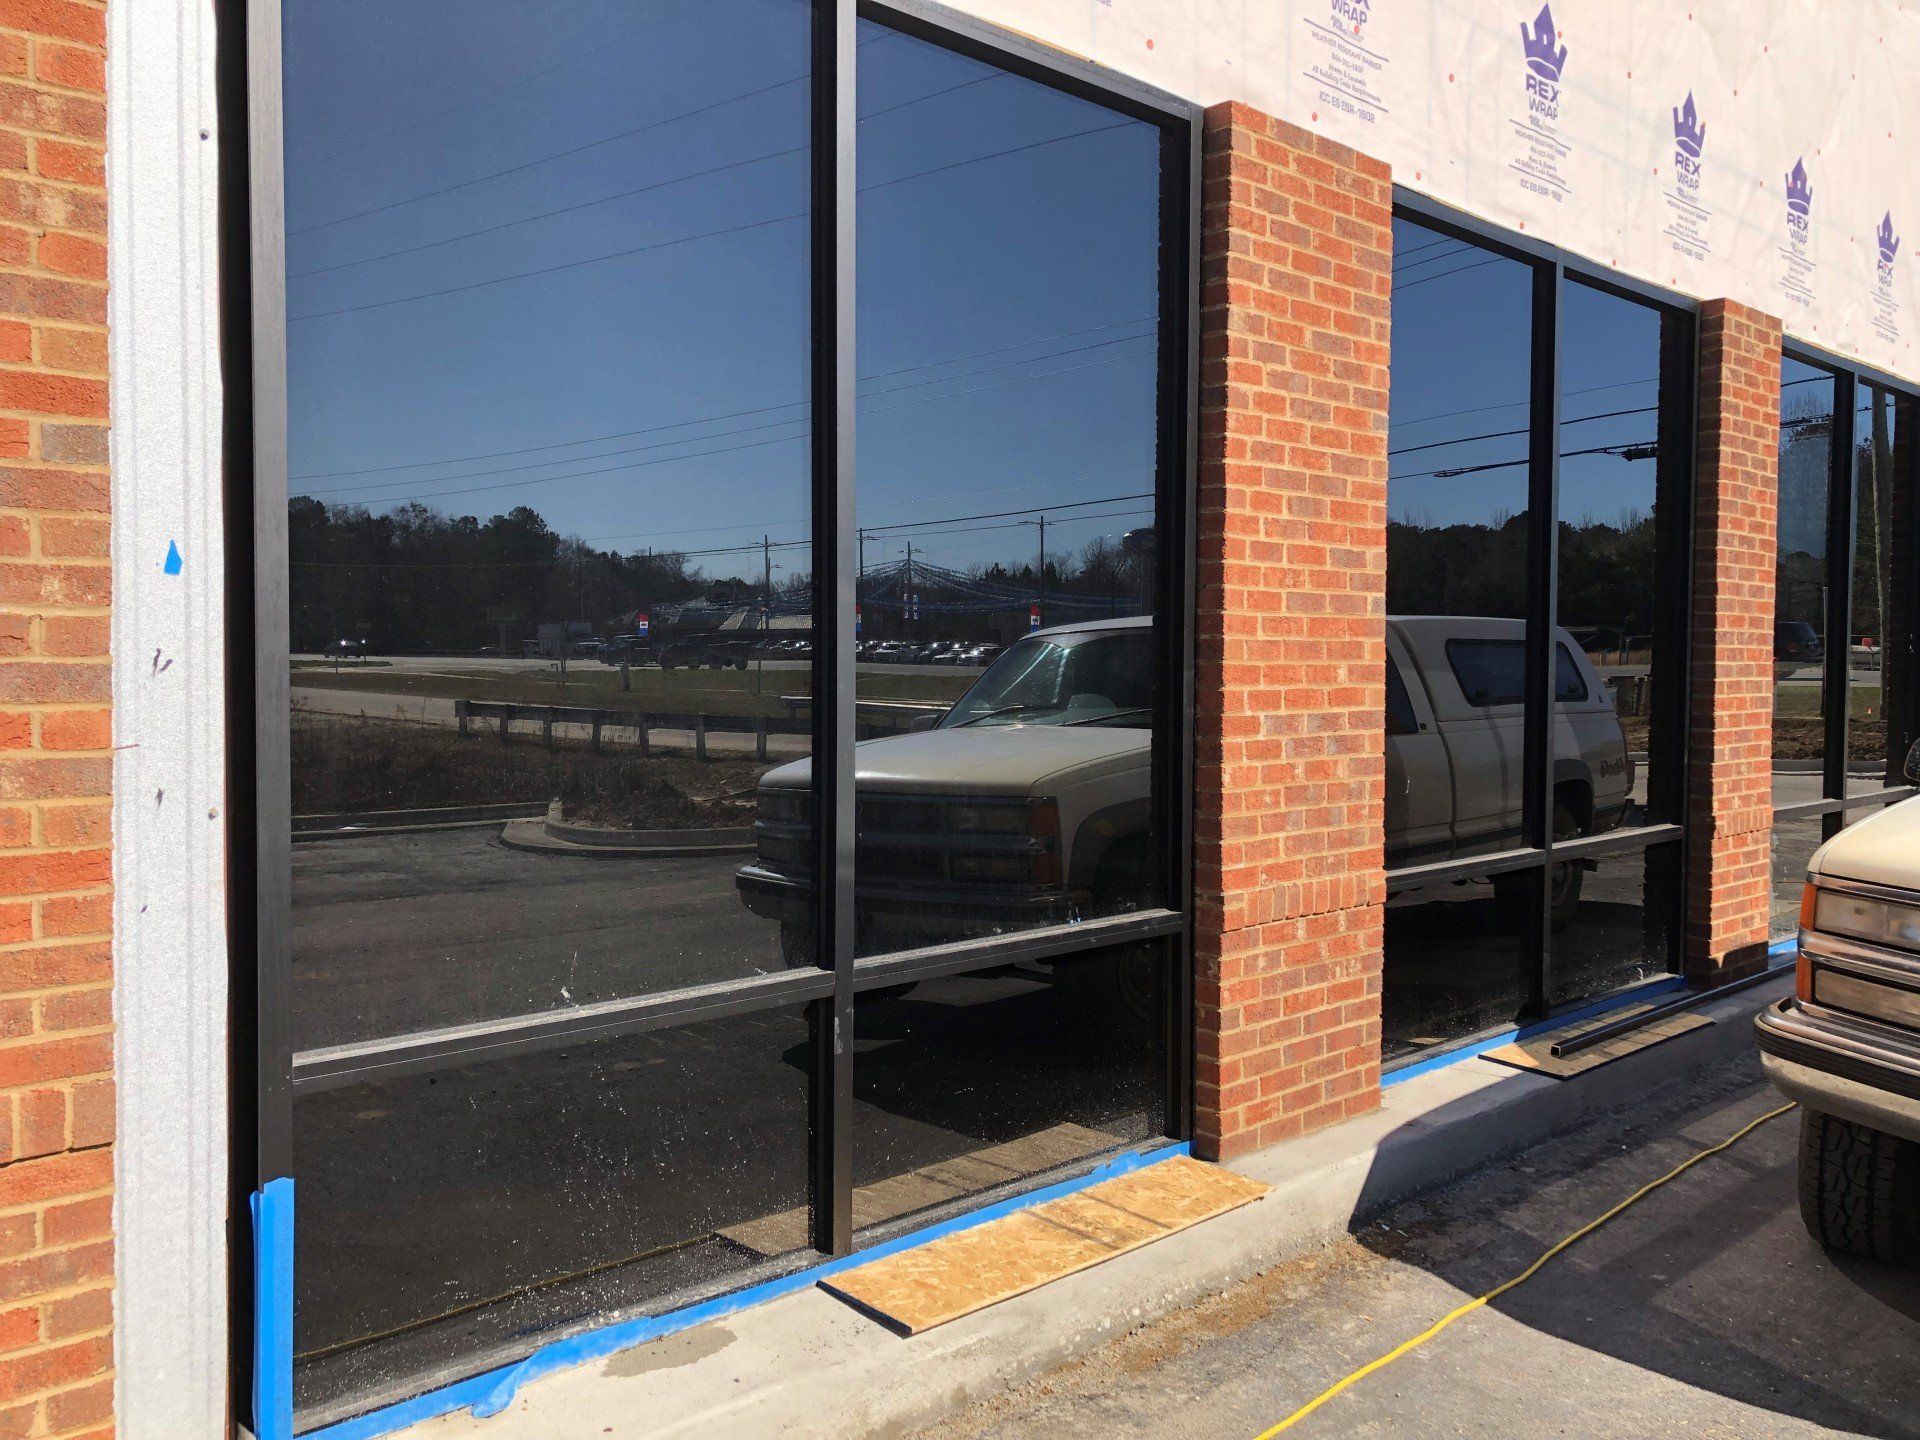 Pro Tint installed at Pizza Hut - Business Tint Installation to restaurant windows in Wetumpka, AL on 1.31.2019